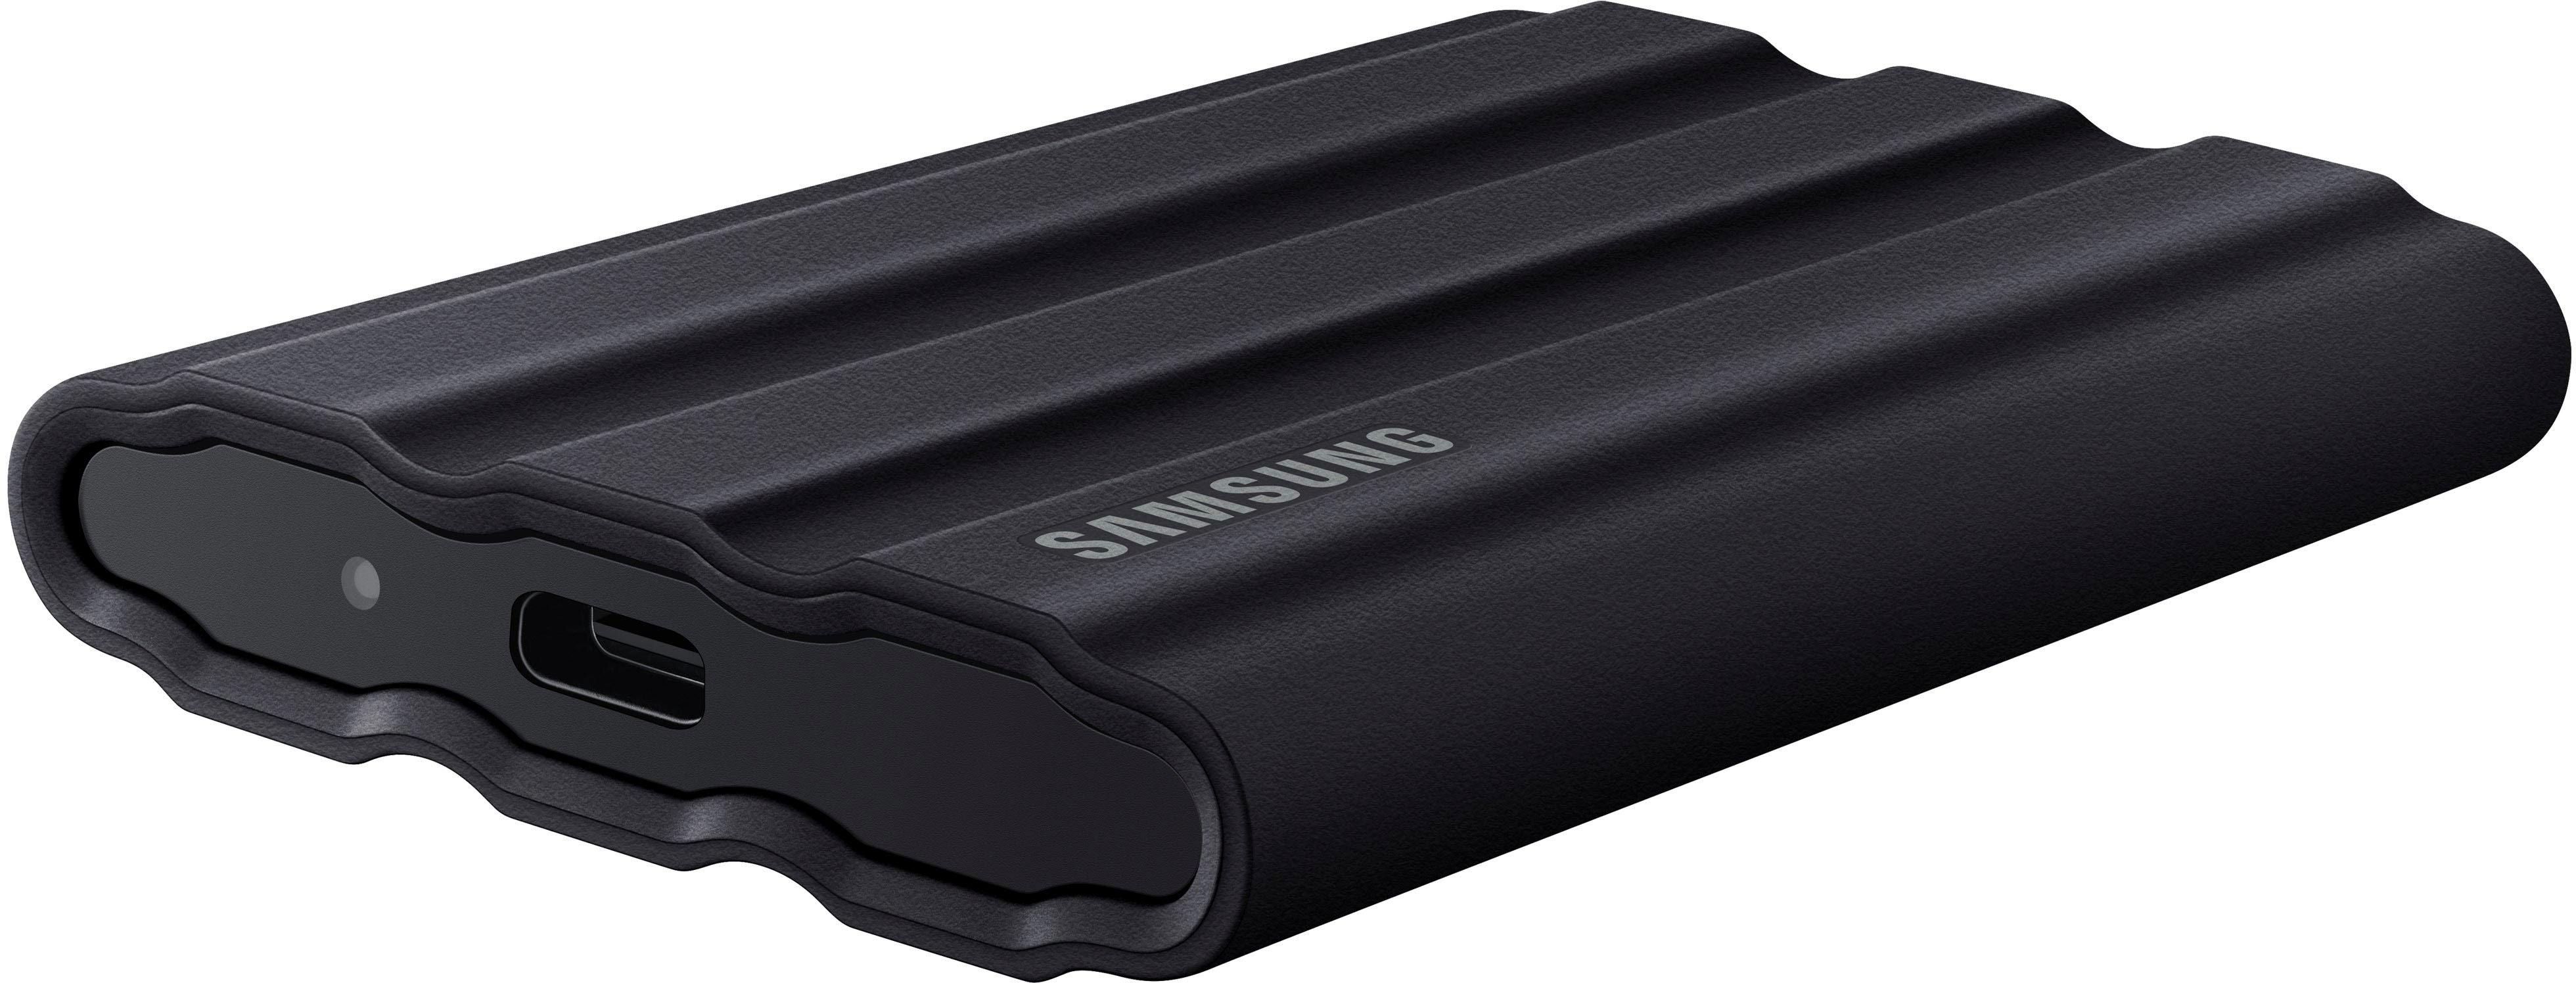 Samsung launches new rugged T7 Shield Portable SSD with IP65 dust and water  protection - 9to5Mac